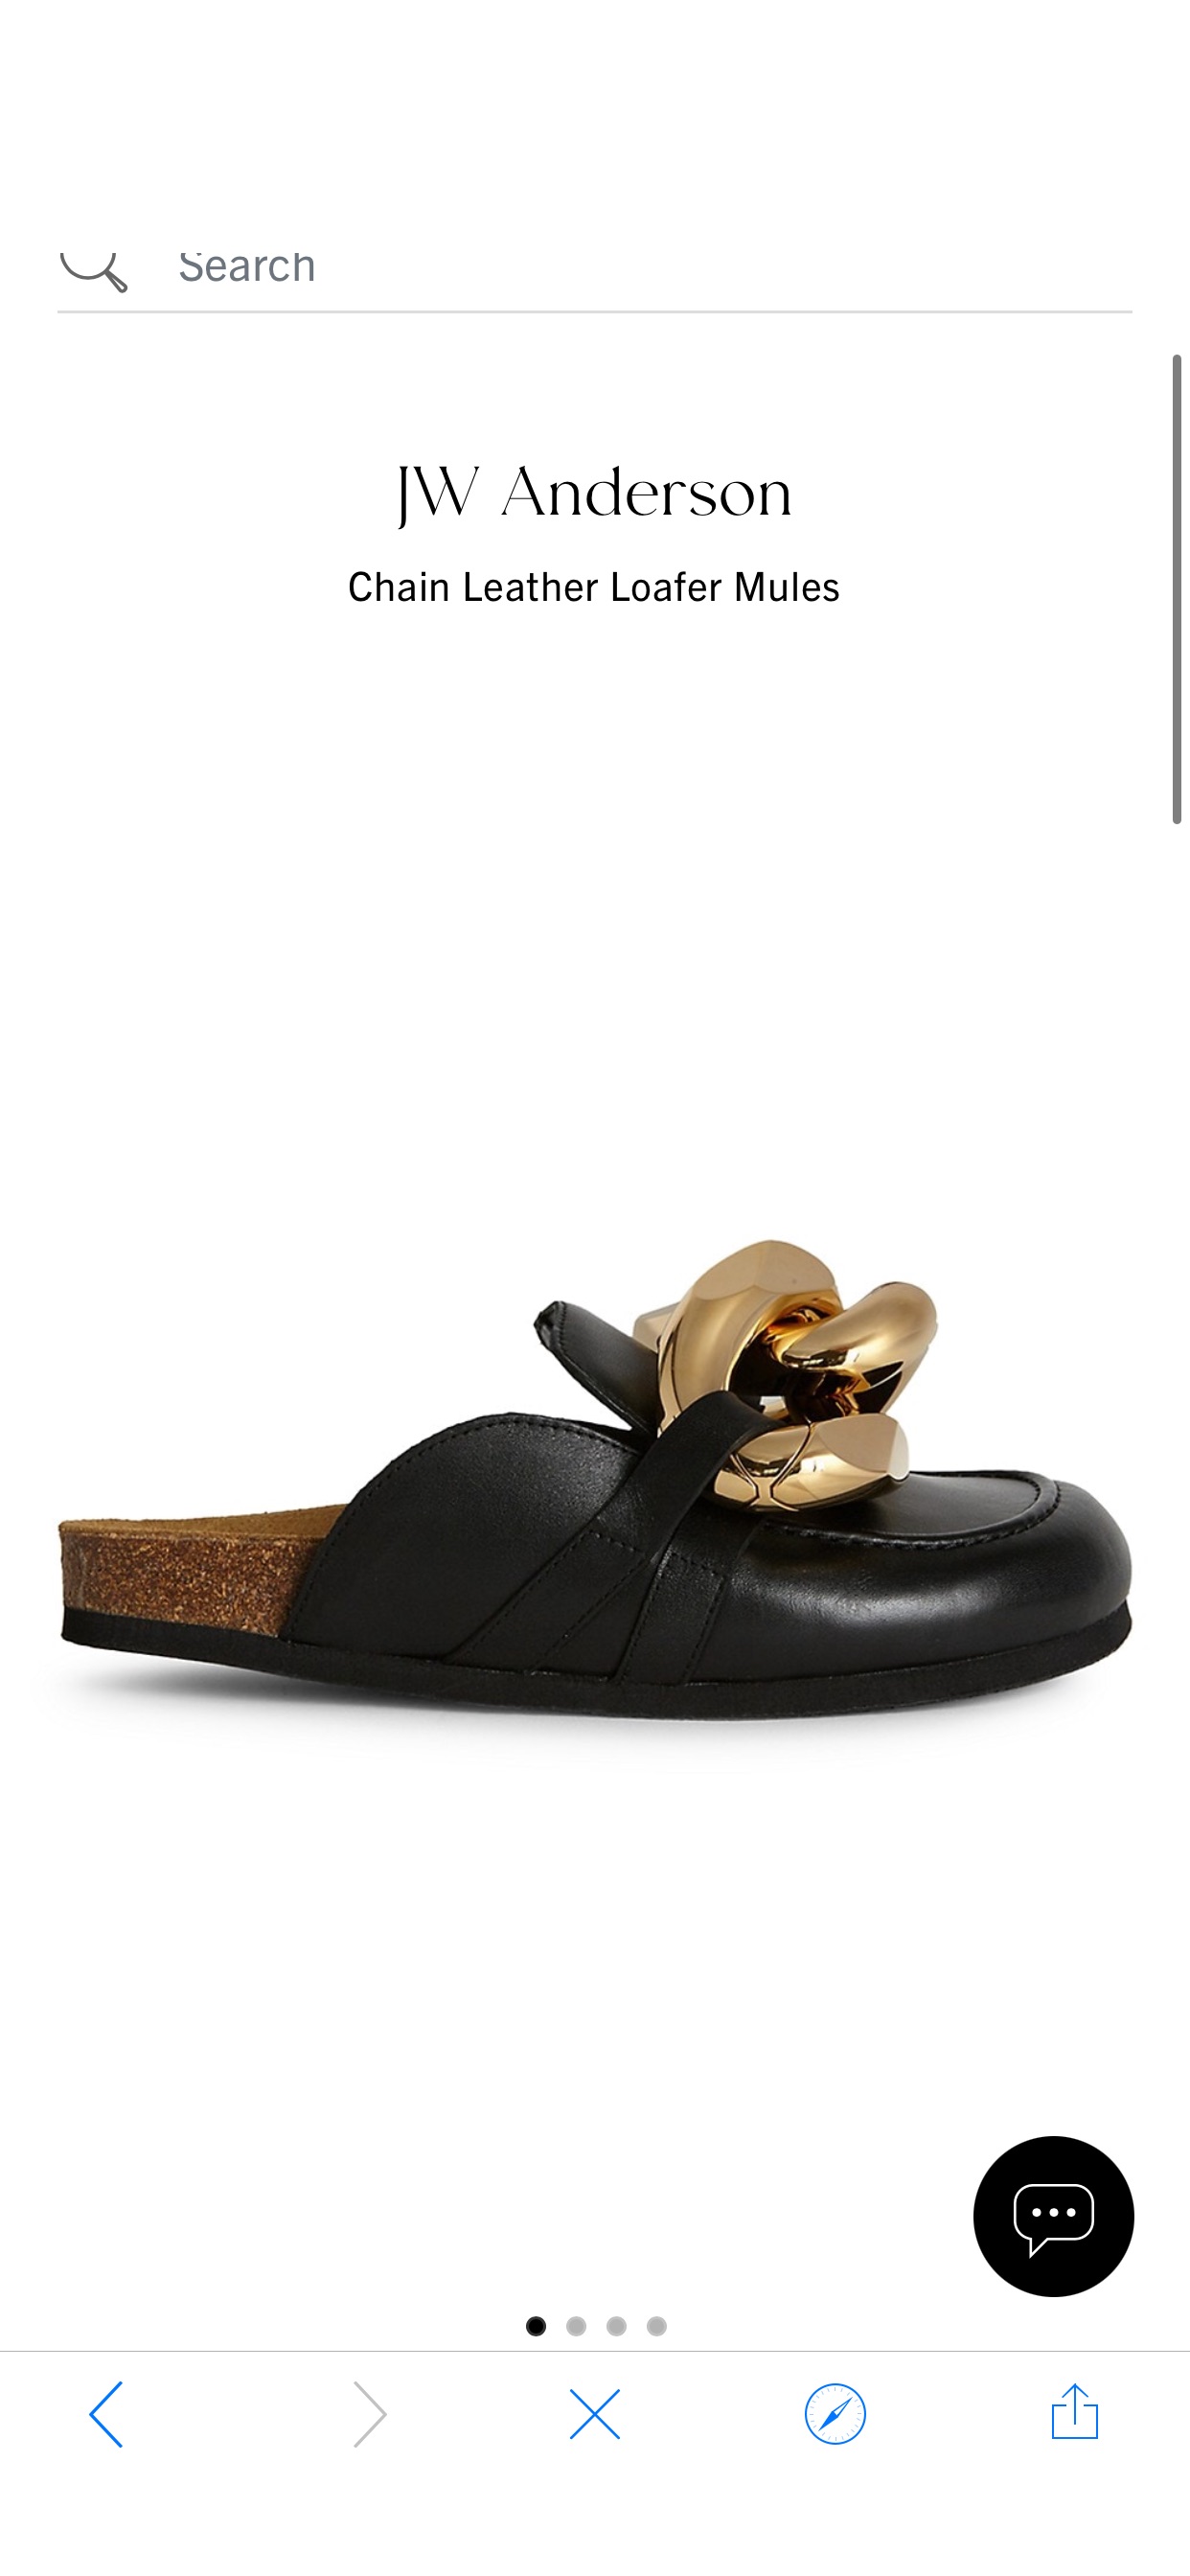 Shop JW Anderson Chain Leather Loafer Mules | Saks Fifth Avenue
鞋子